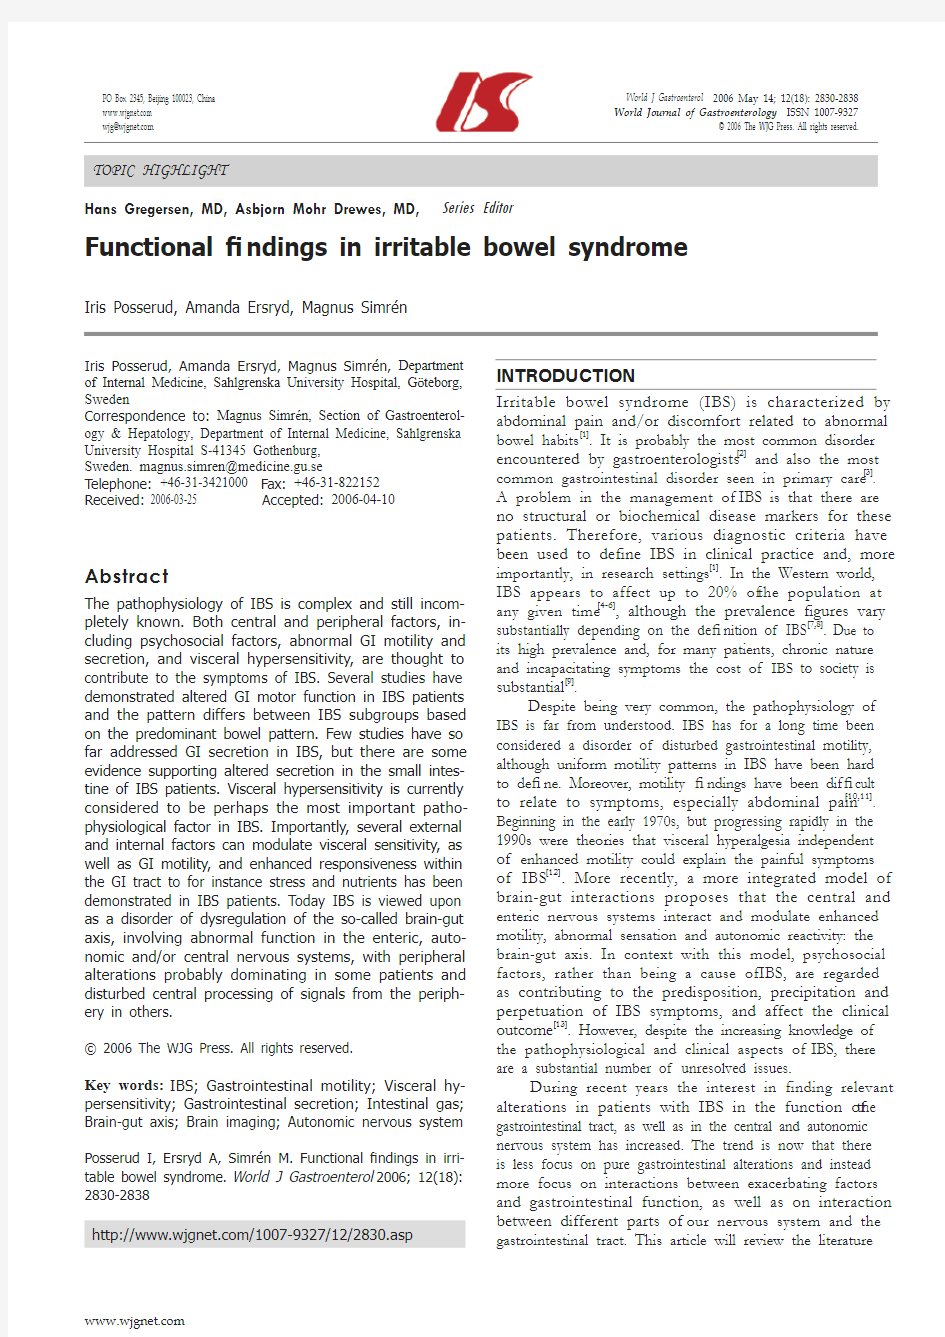 Functional findings in irritable bowel syndrome